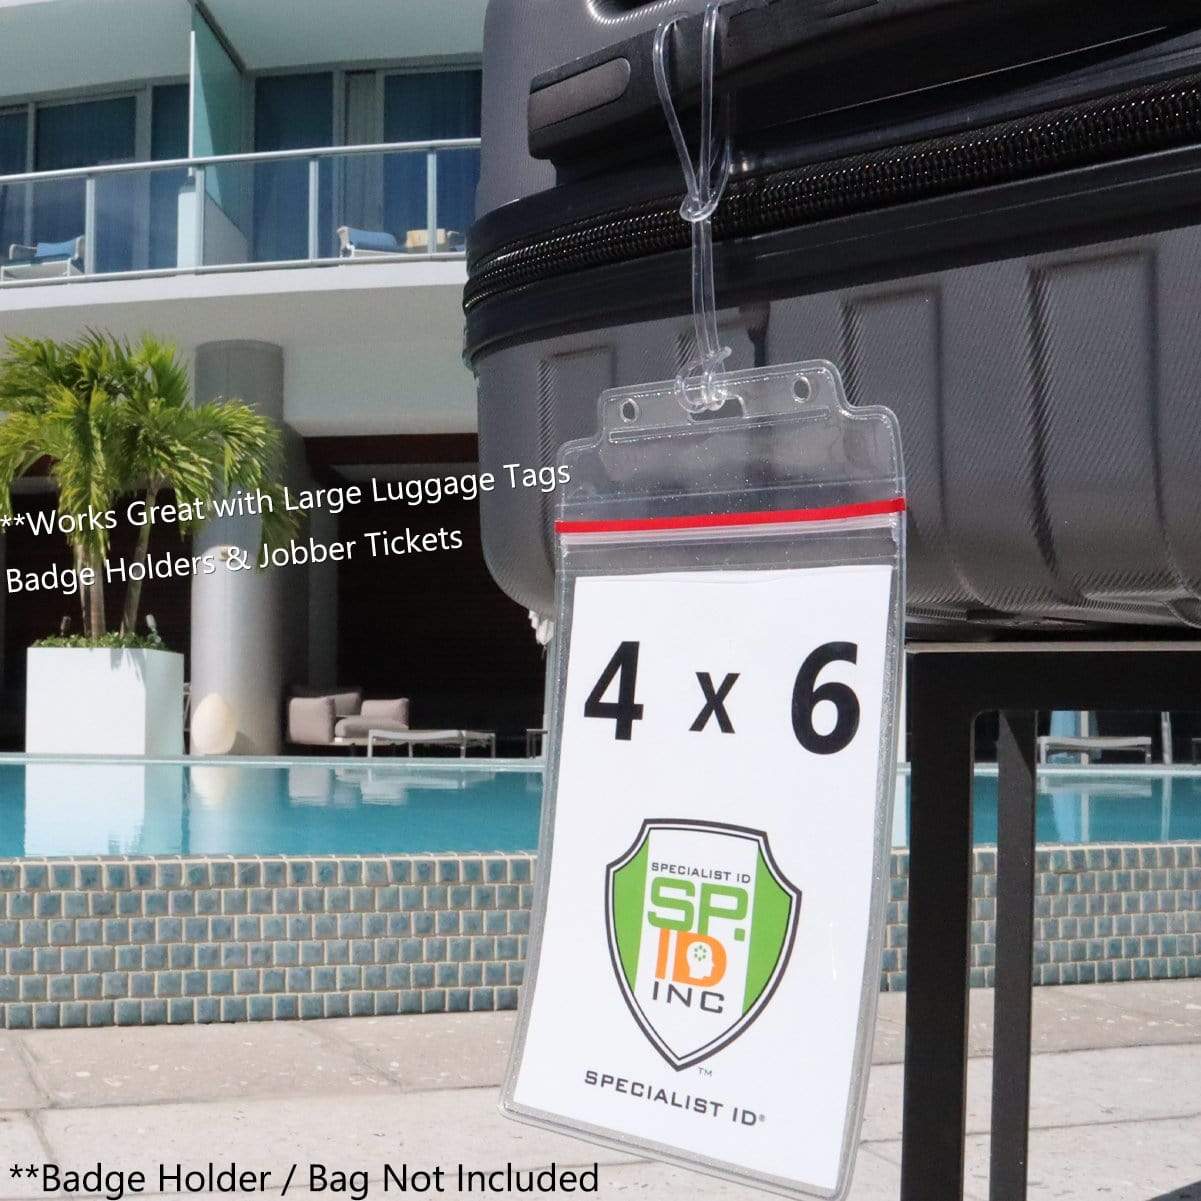 A clear luggage tag holder with a "4 x 6" card inside is attached to a suitcase using an Extra Long 9" Luggage Tag Loops - Clear Worm Loops for Luggage Tags (2410-2100). The background showcases an outdoor setting with a swimming pool and modern building. Text states badge holder/bag not included.